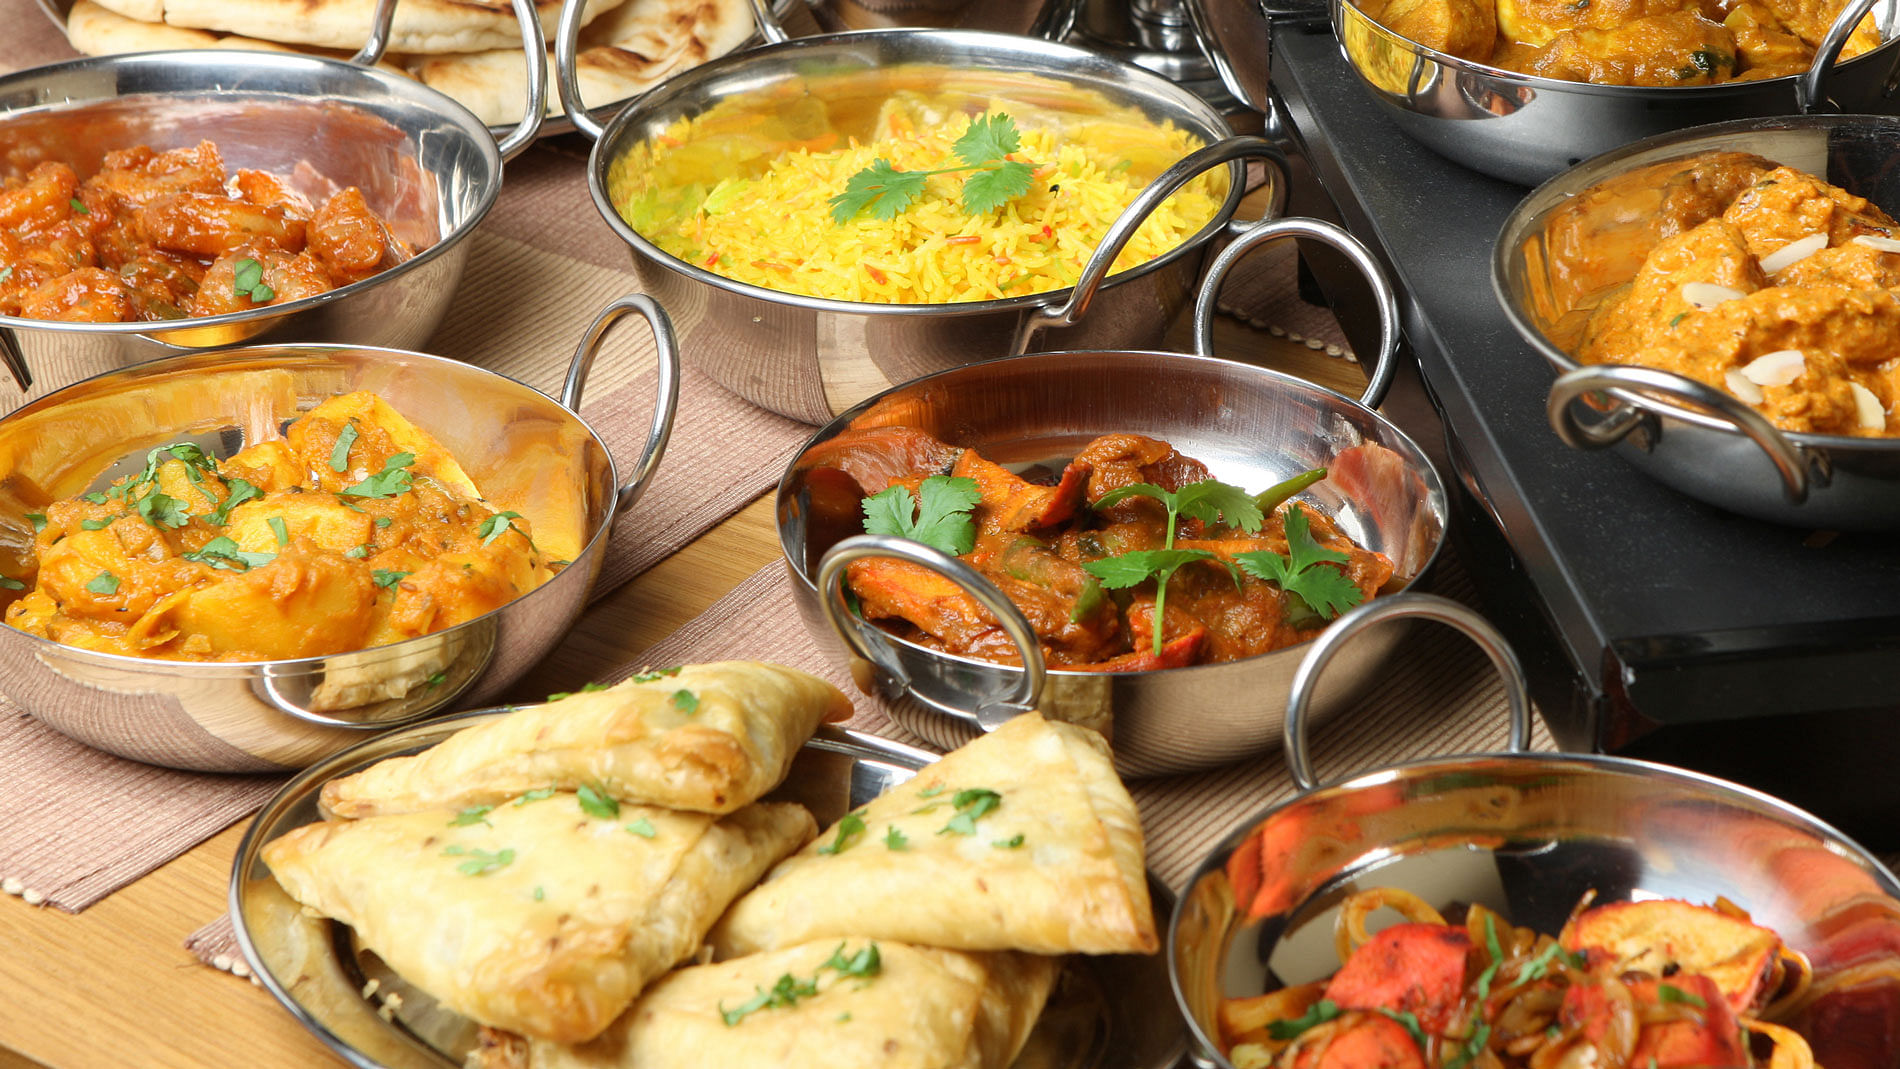 A typical Indian food platter. (Source: iStockphoto)